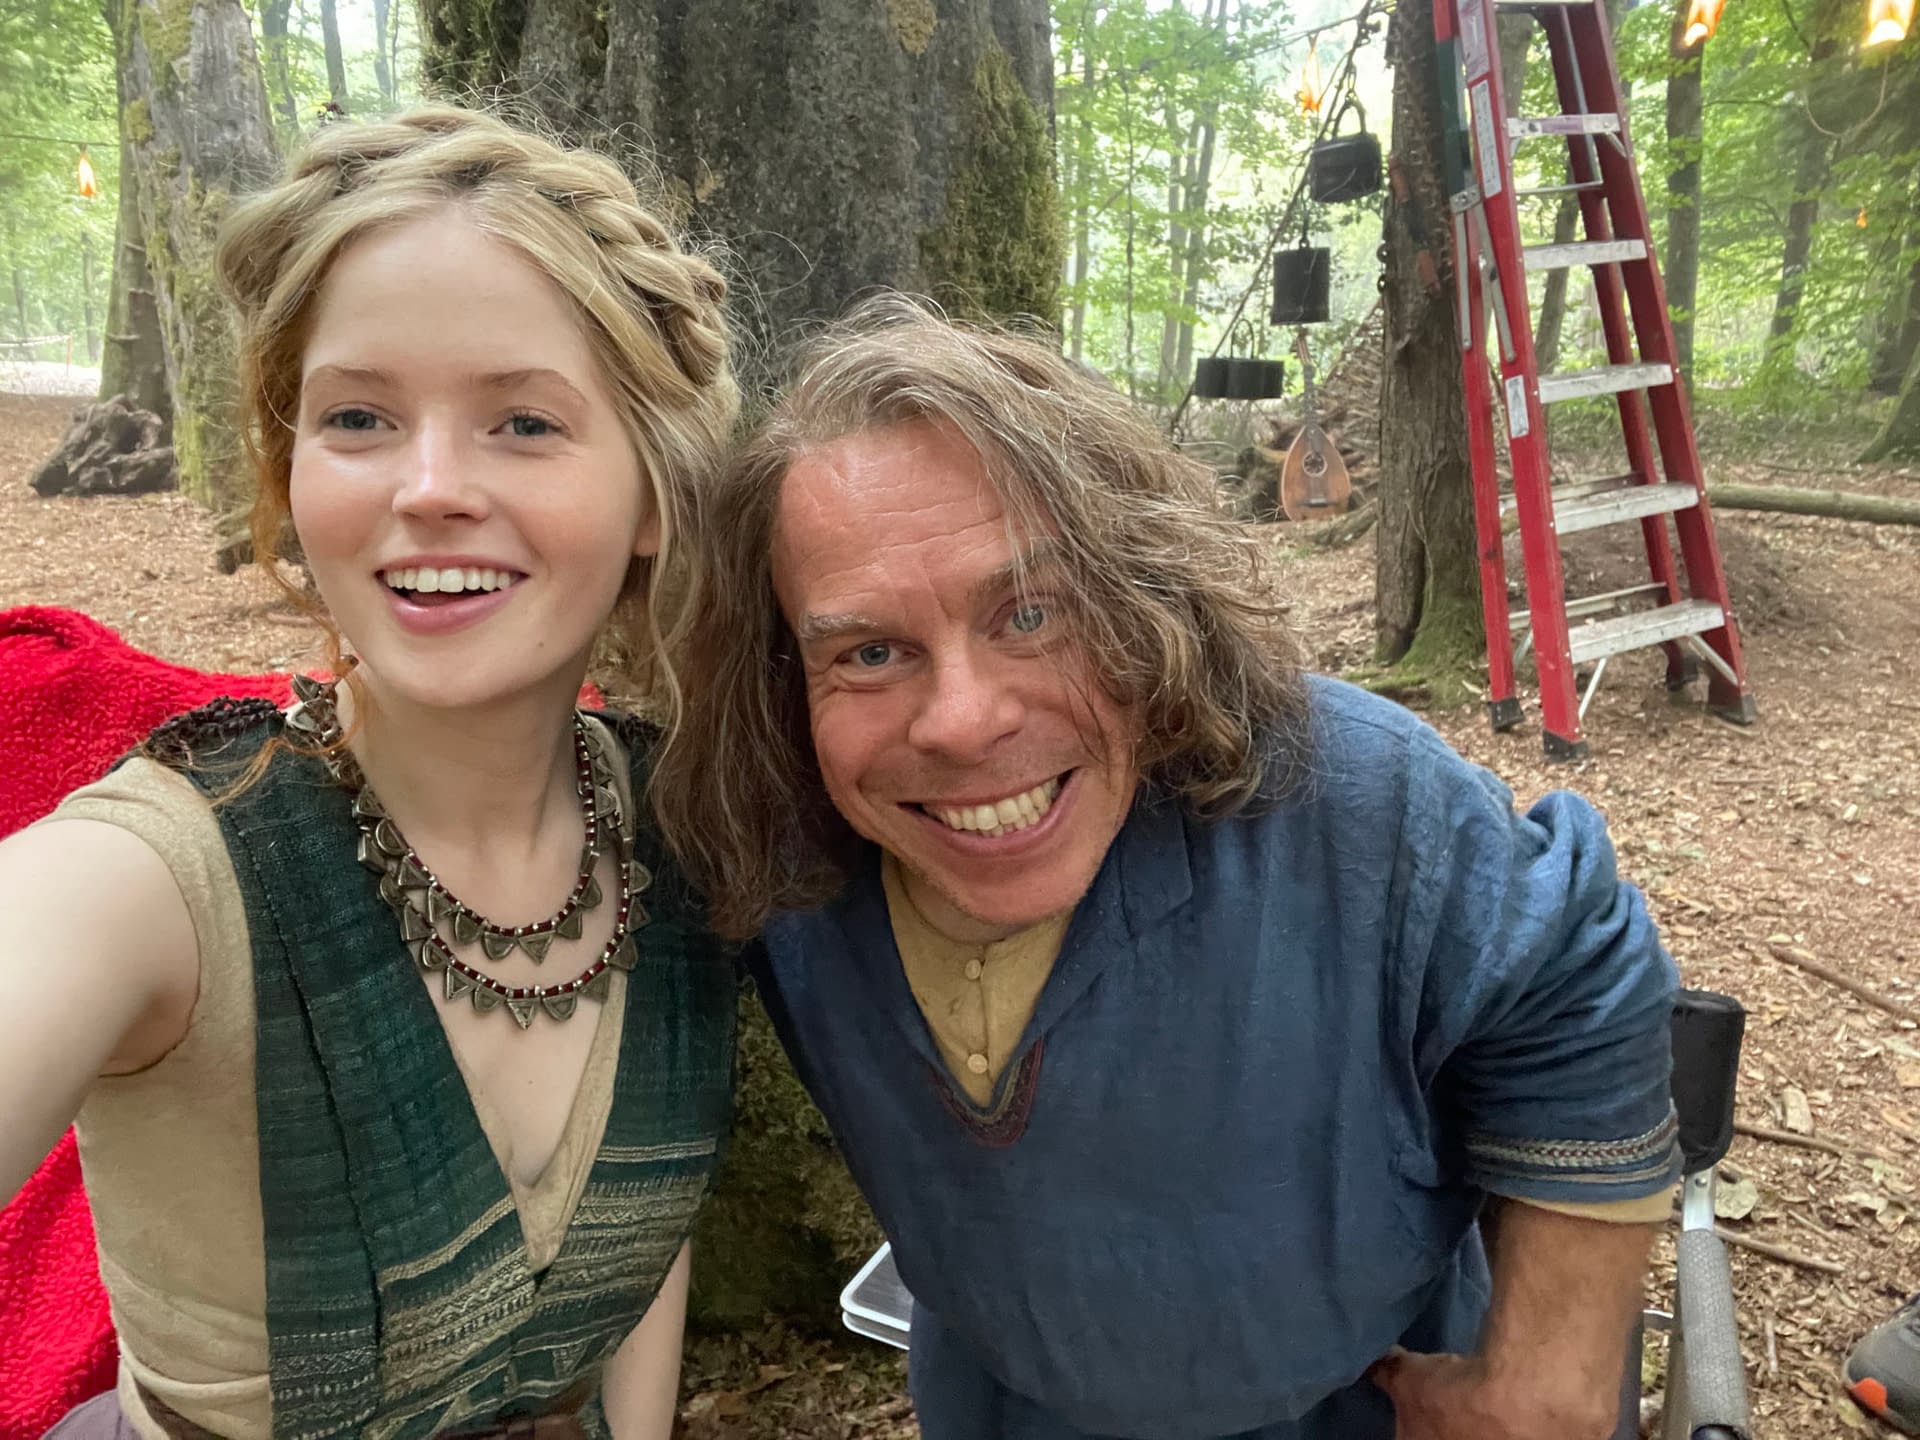 Willow Disney+ Sequel Series Cast Shares BehindtheScenes Looks